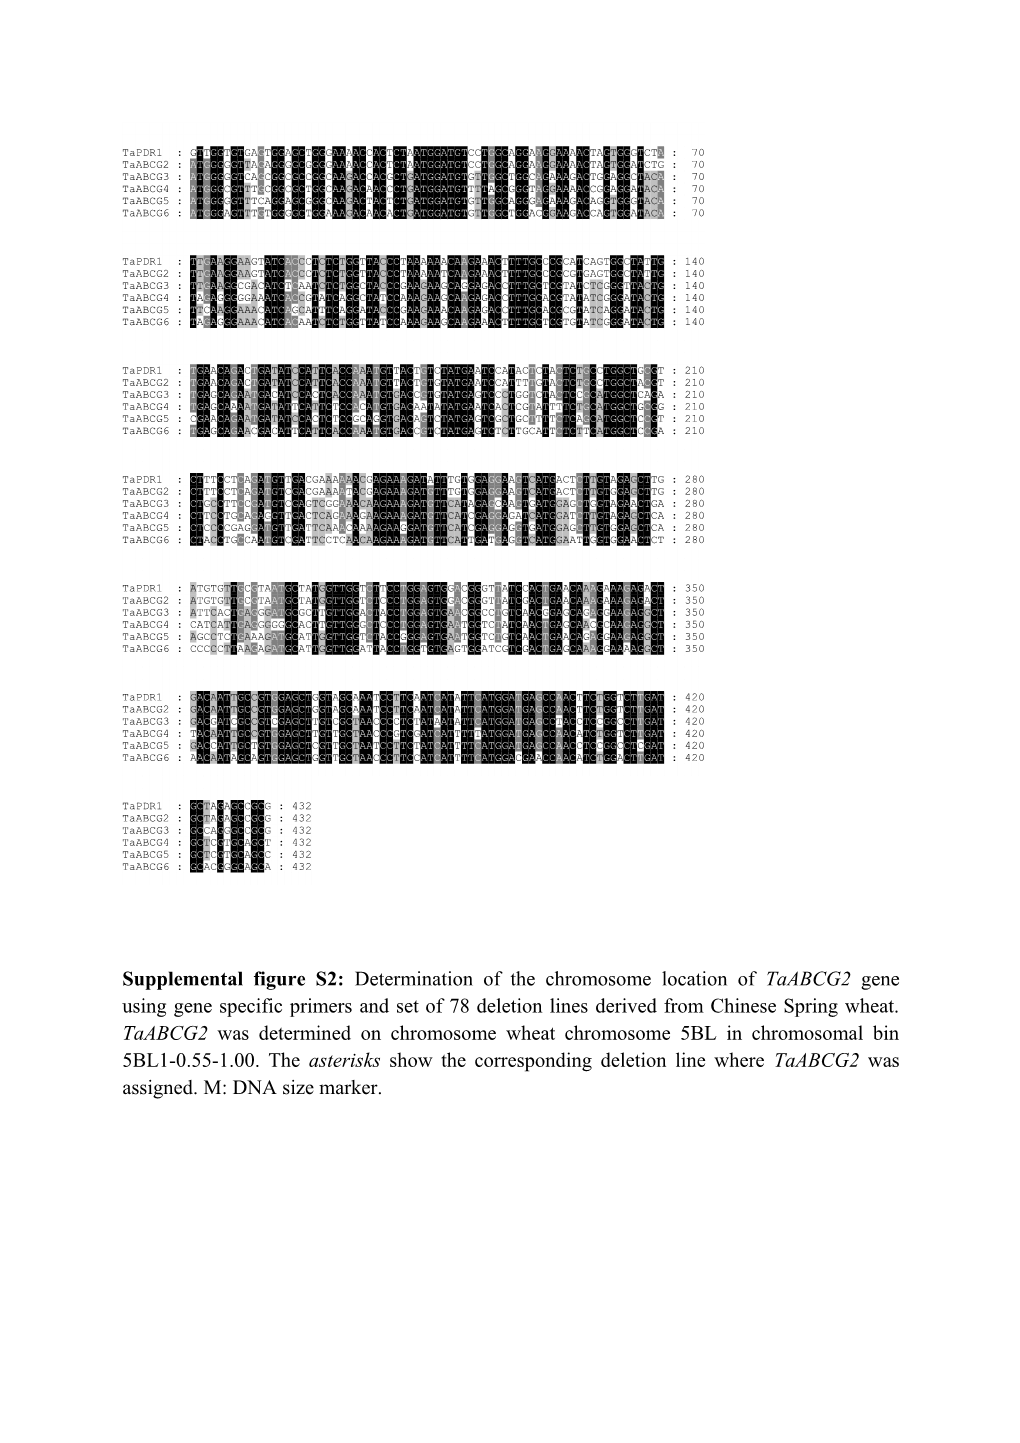 Supplemental Table S1: Accession Numbers of 55 Protein Sequences Used for the Phylogenetic